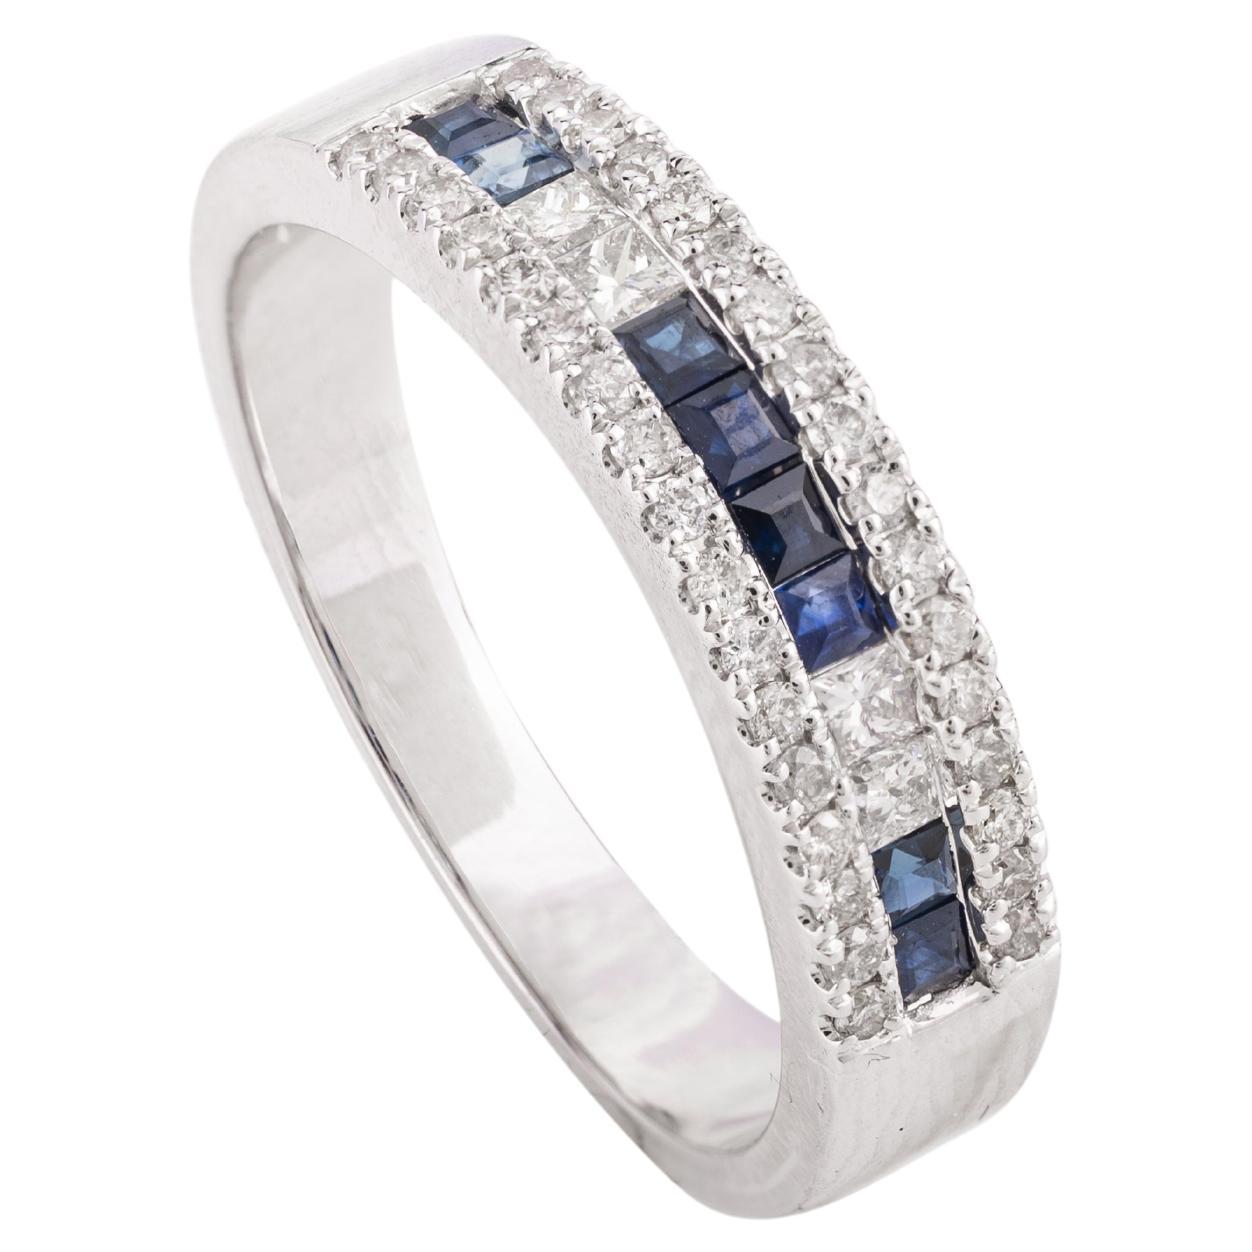 For Sale:  Stunning Blue Sapphire Diamond Engagement Band Ring for Her in 18k White Gold